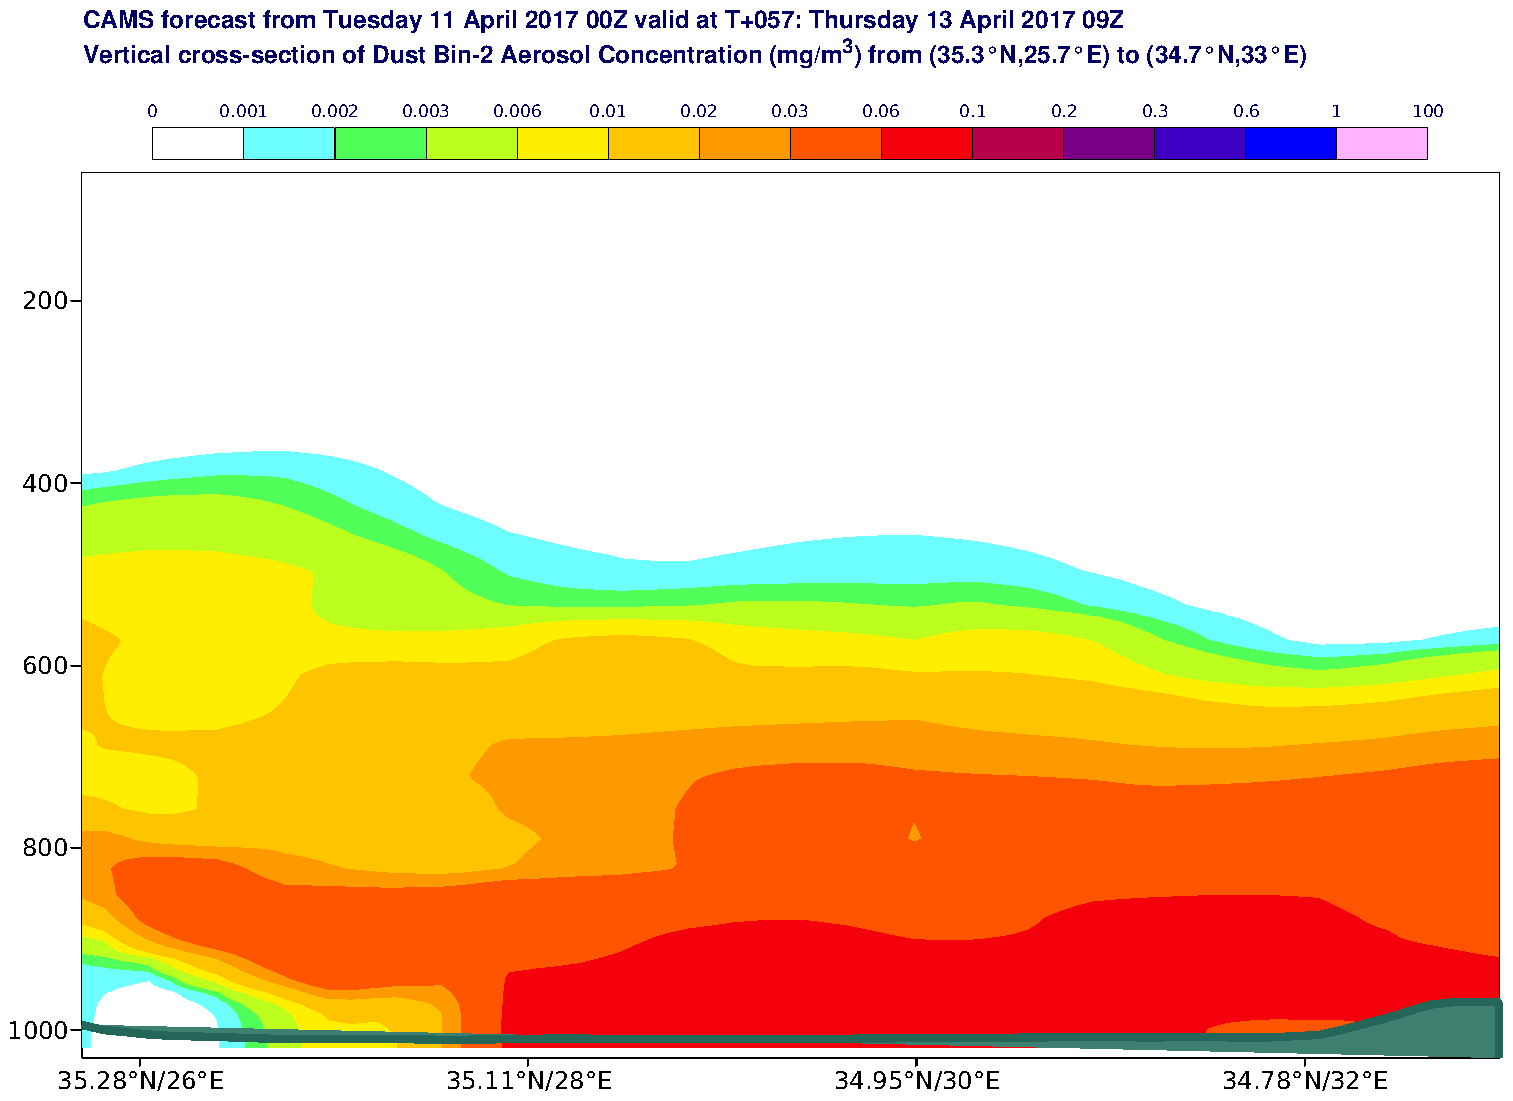 Vertical cross-section of Dust Bin-2 Aerosol Concentration (mg/m3) valid at T57 - 2017-04-13 09:00